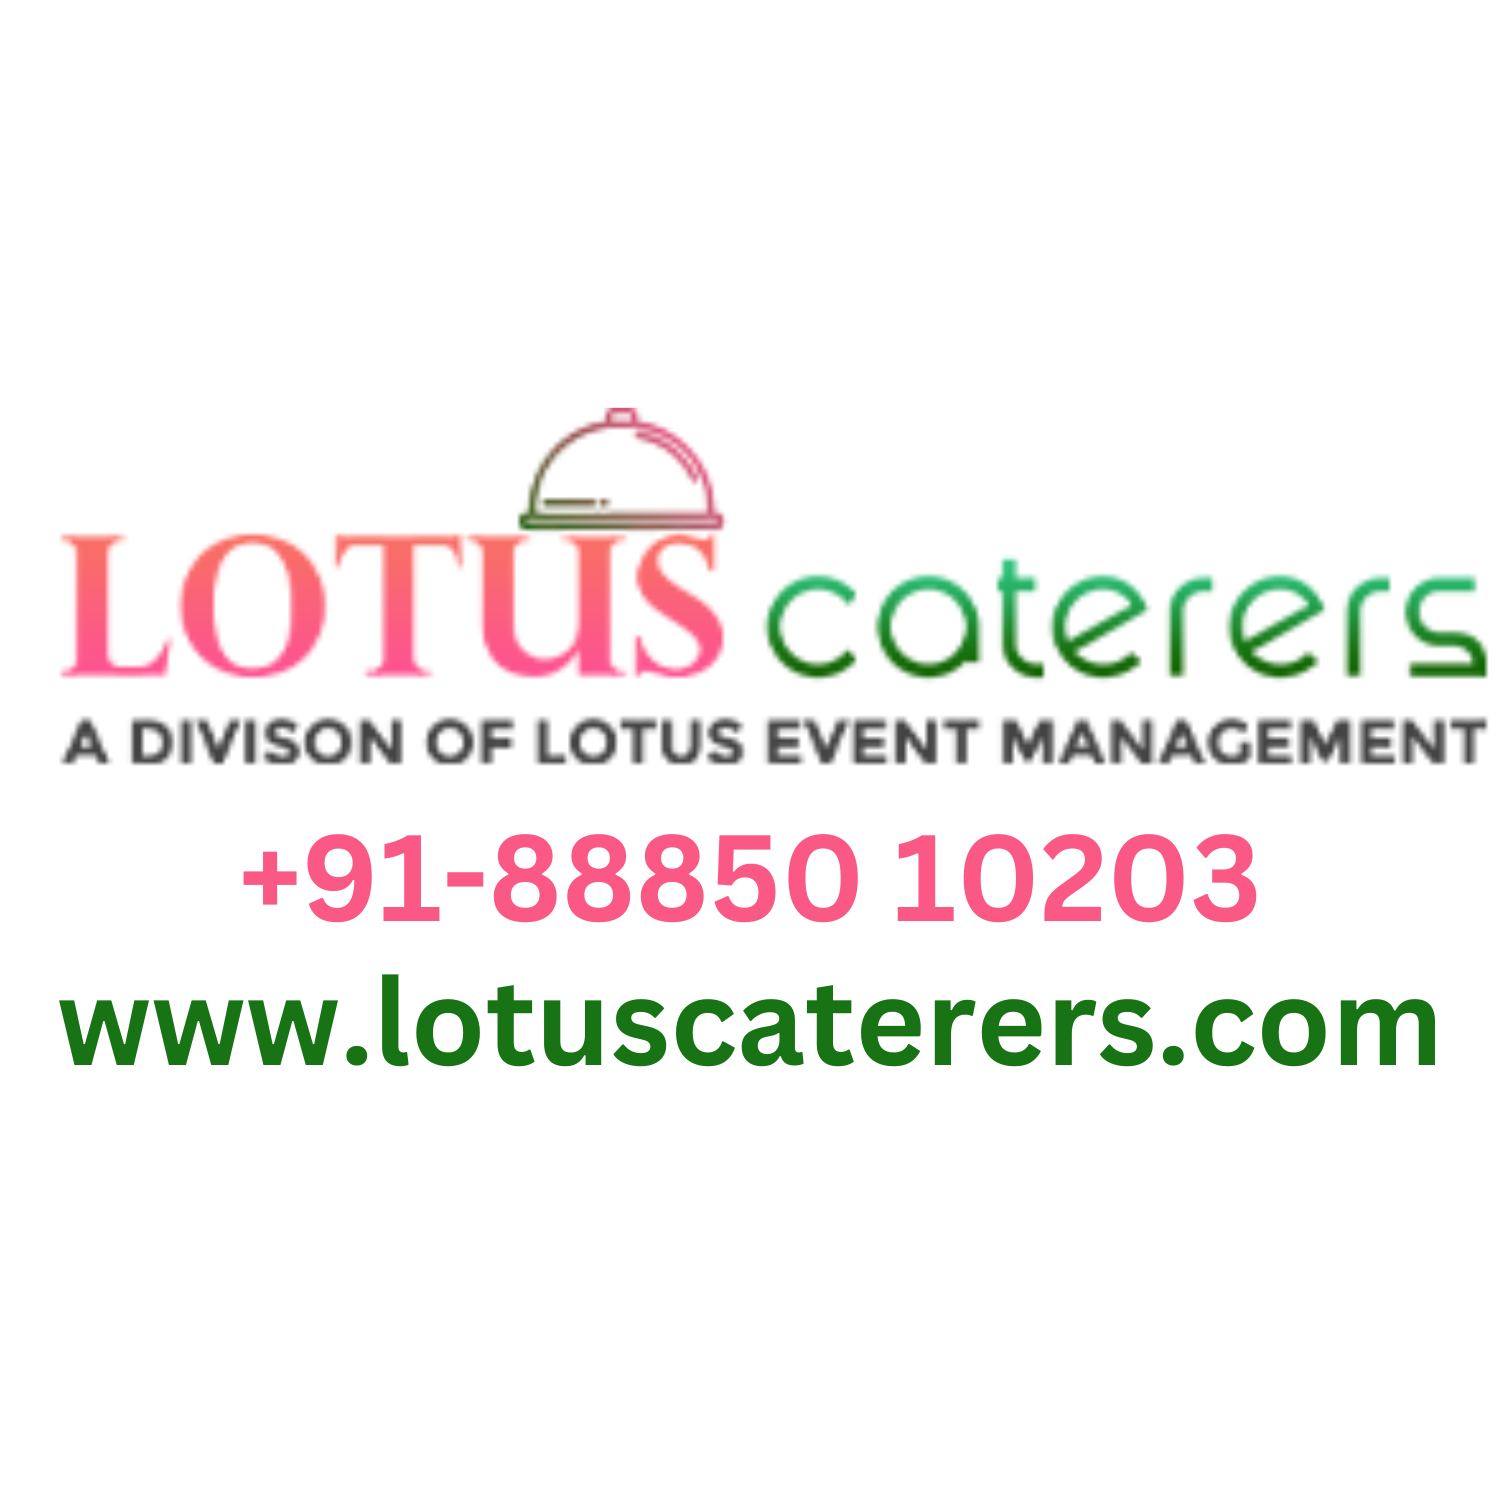 Lotus Caterers - Best Caterers in Hyderabad|Photographer|Event Services